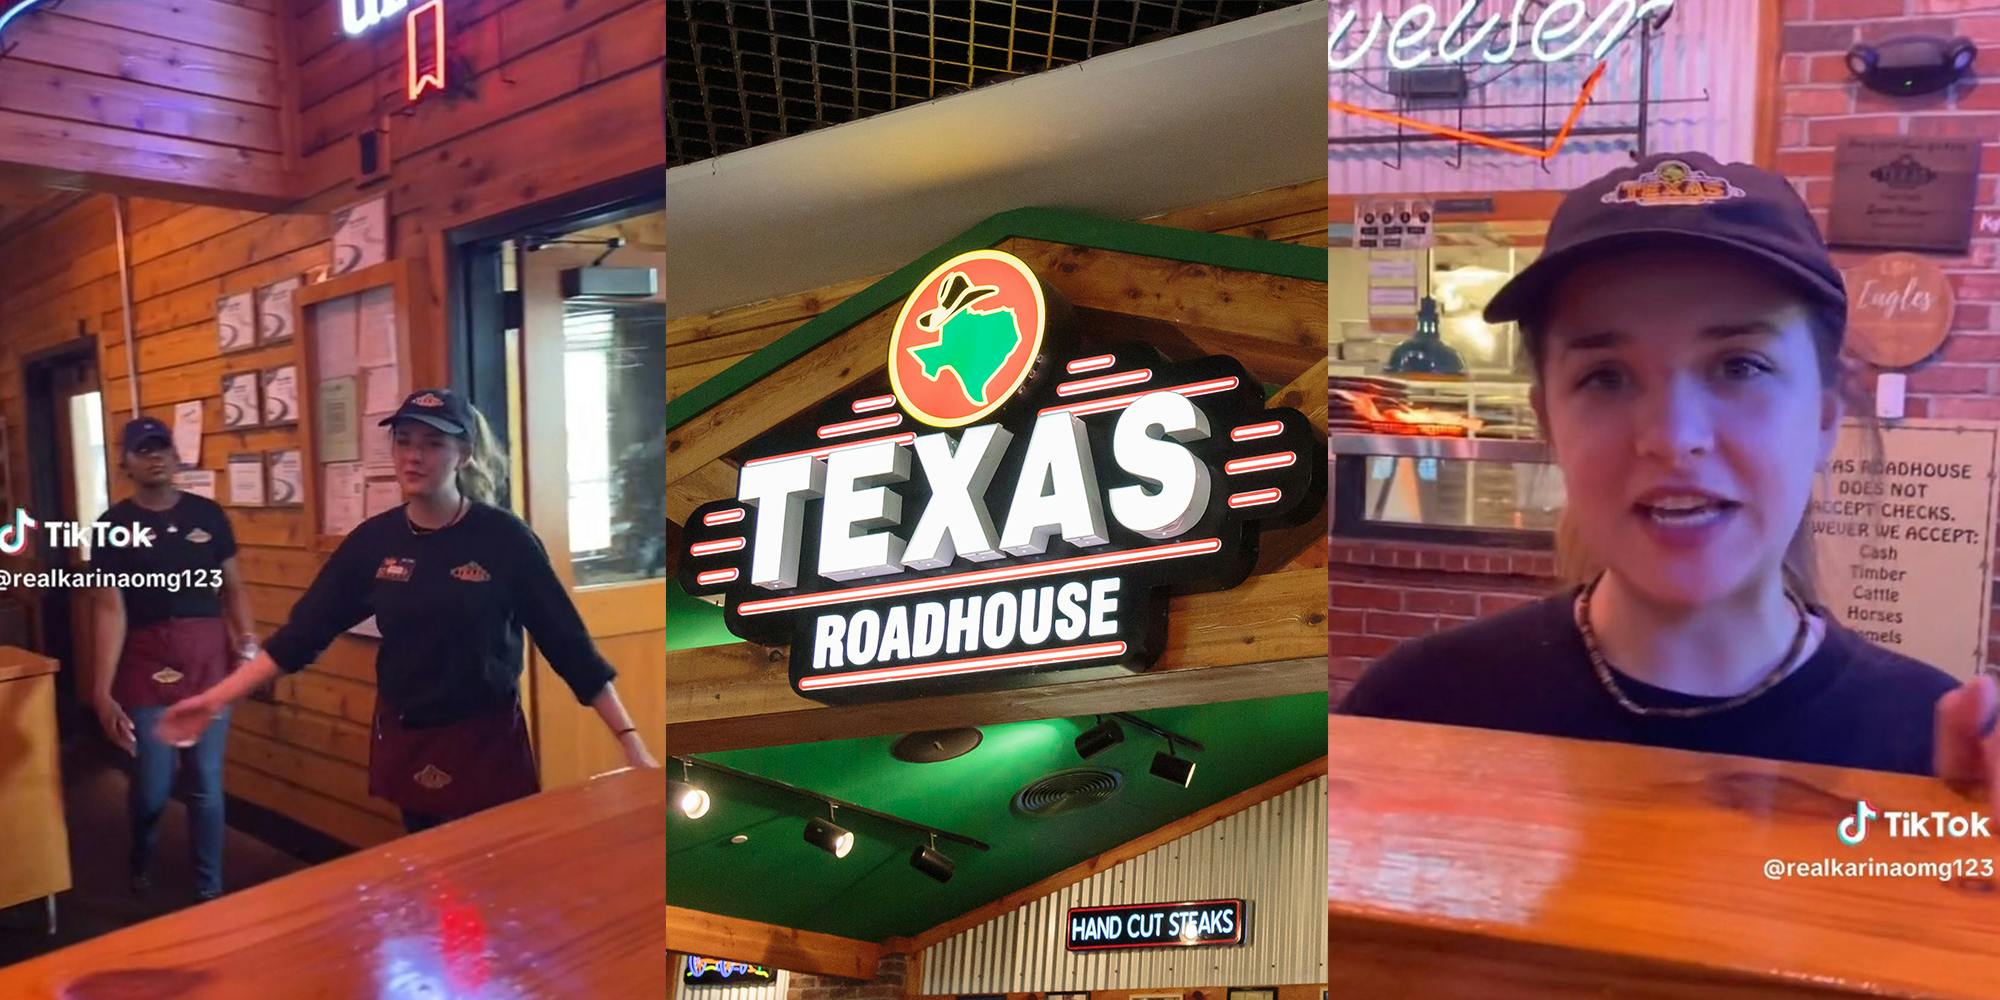 Texas Roadhouse worker complains about parties of 4 that might be larger